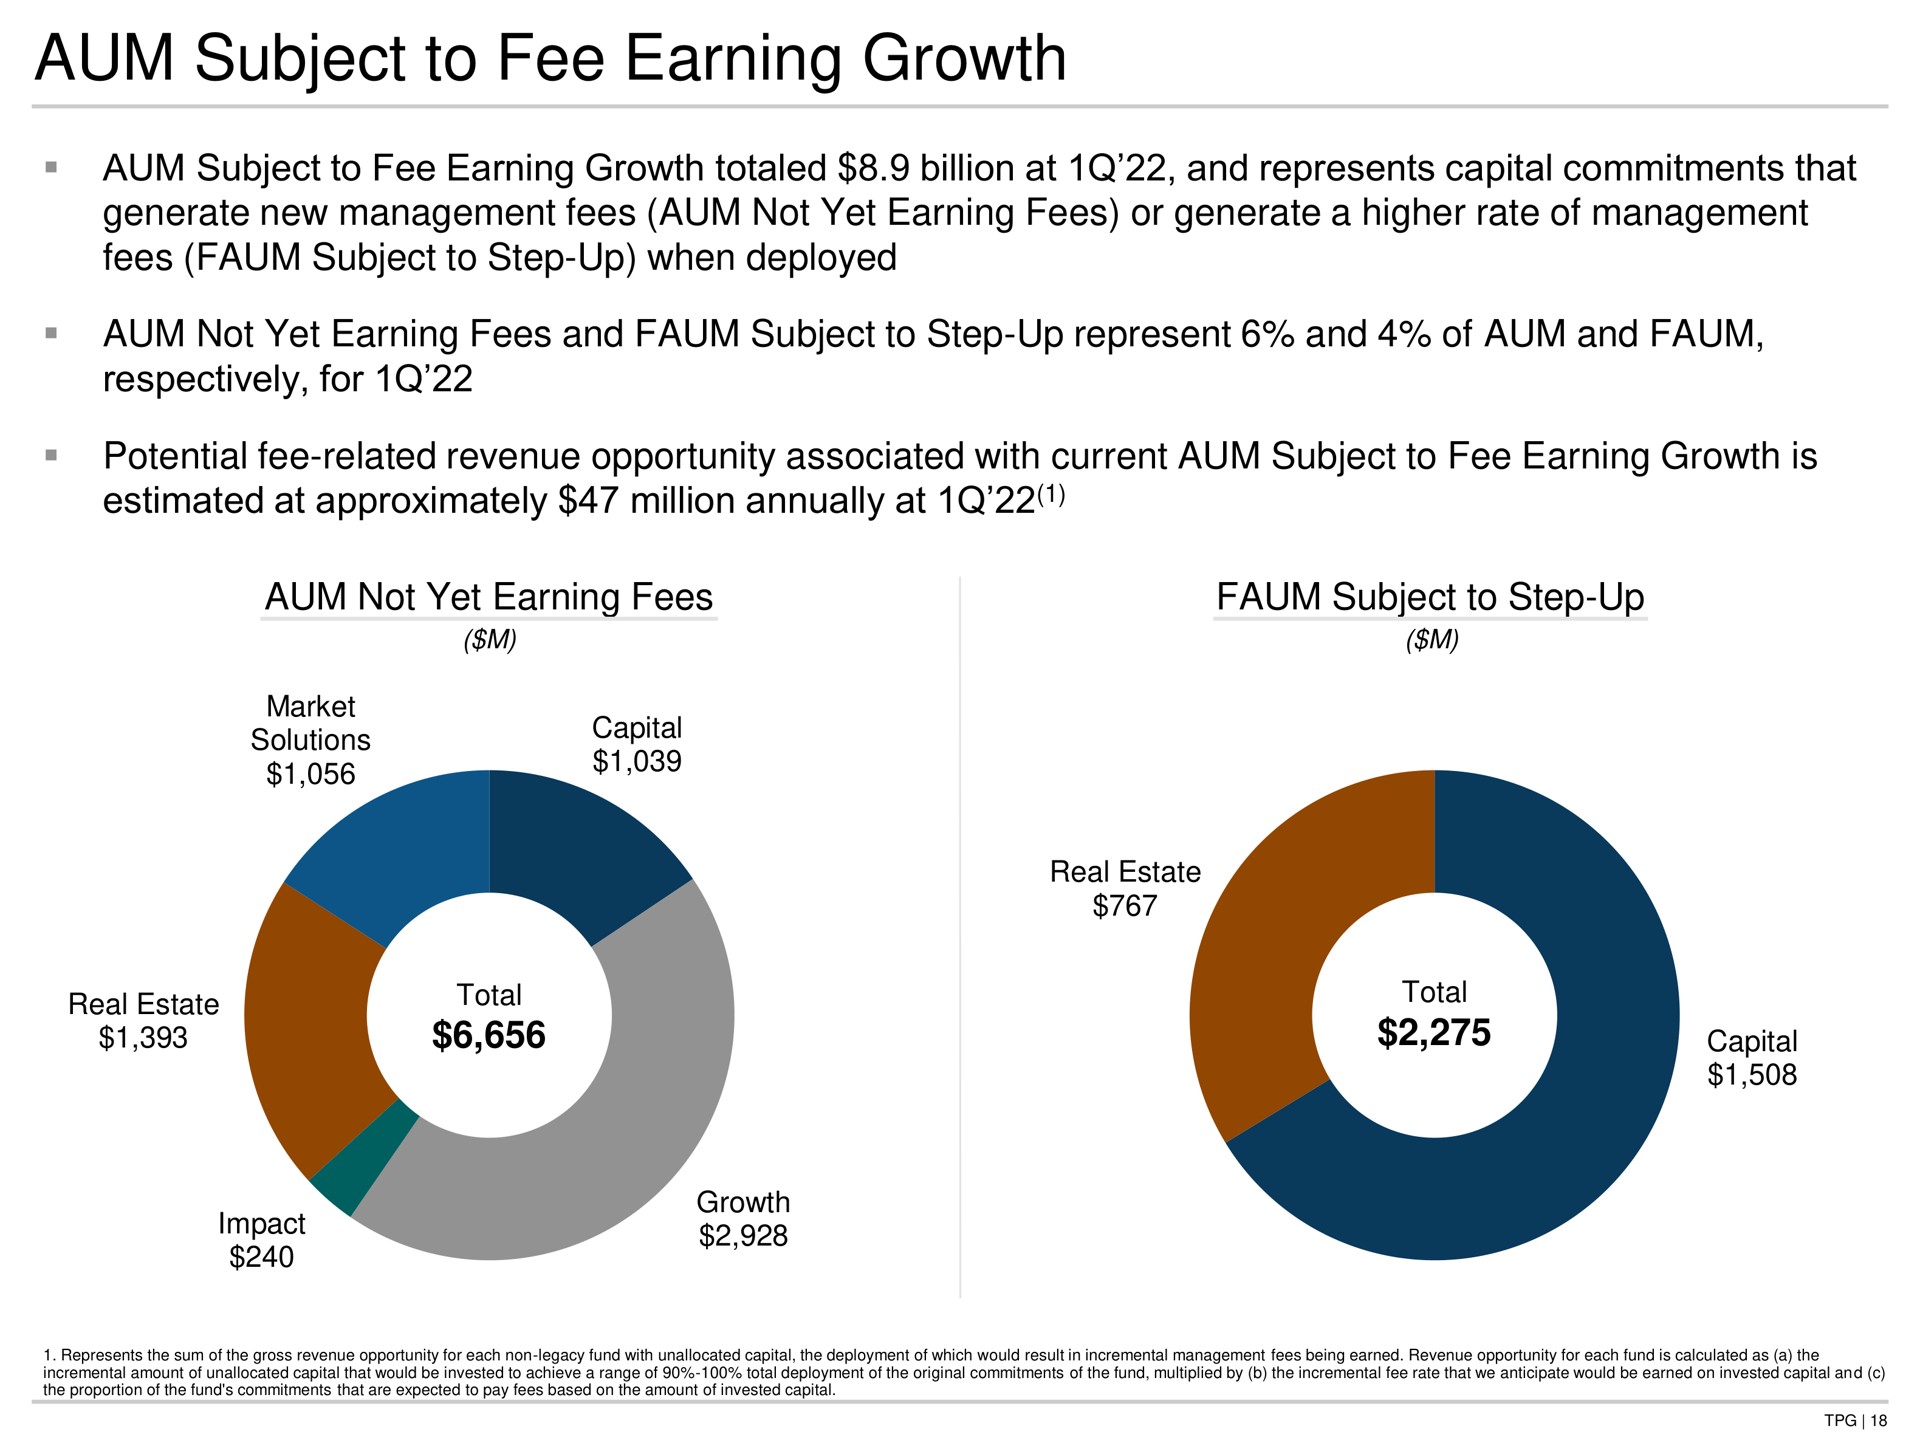 aum subject to fee earning growth aum subject to fee earning growth totaled billion at and represents capital commitments that generate new management fees aum not yet earning fees or generate a higher rate of management fees subject to step up when deployed aum not yet earning fees and subject to step up represent and of aum and respectively for potential fee related revenue opportunity associated with current aum subject to fee earning growth is estimated at approximately million annually at aum not yet earning fees subject to step up | TPG